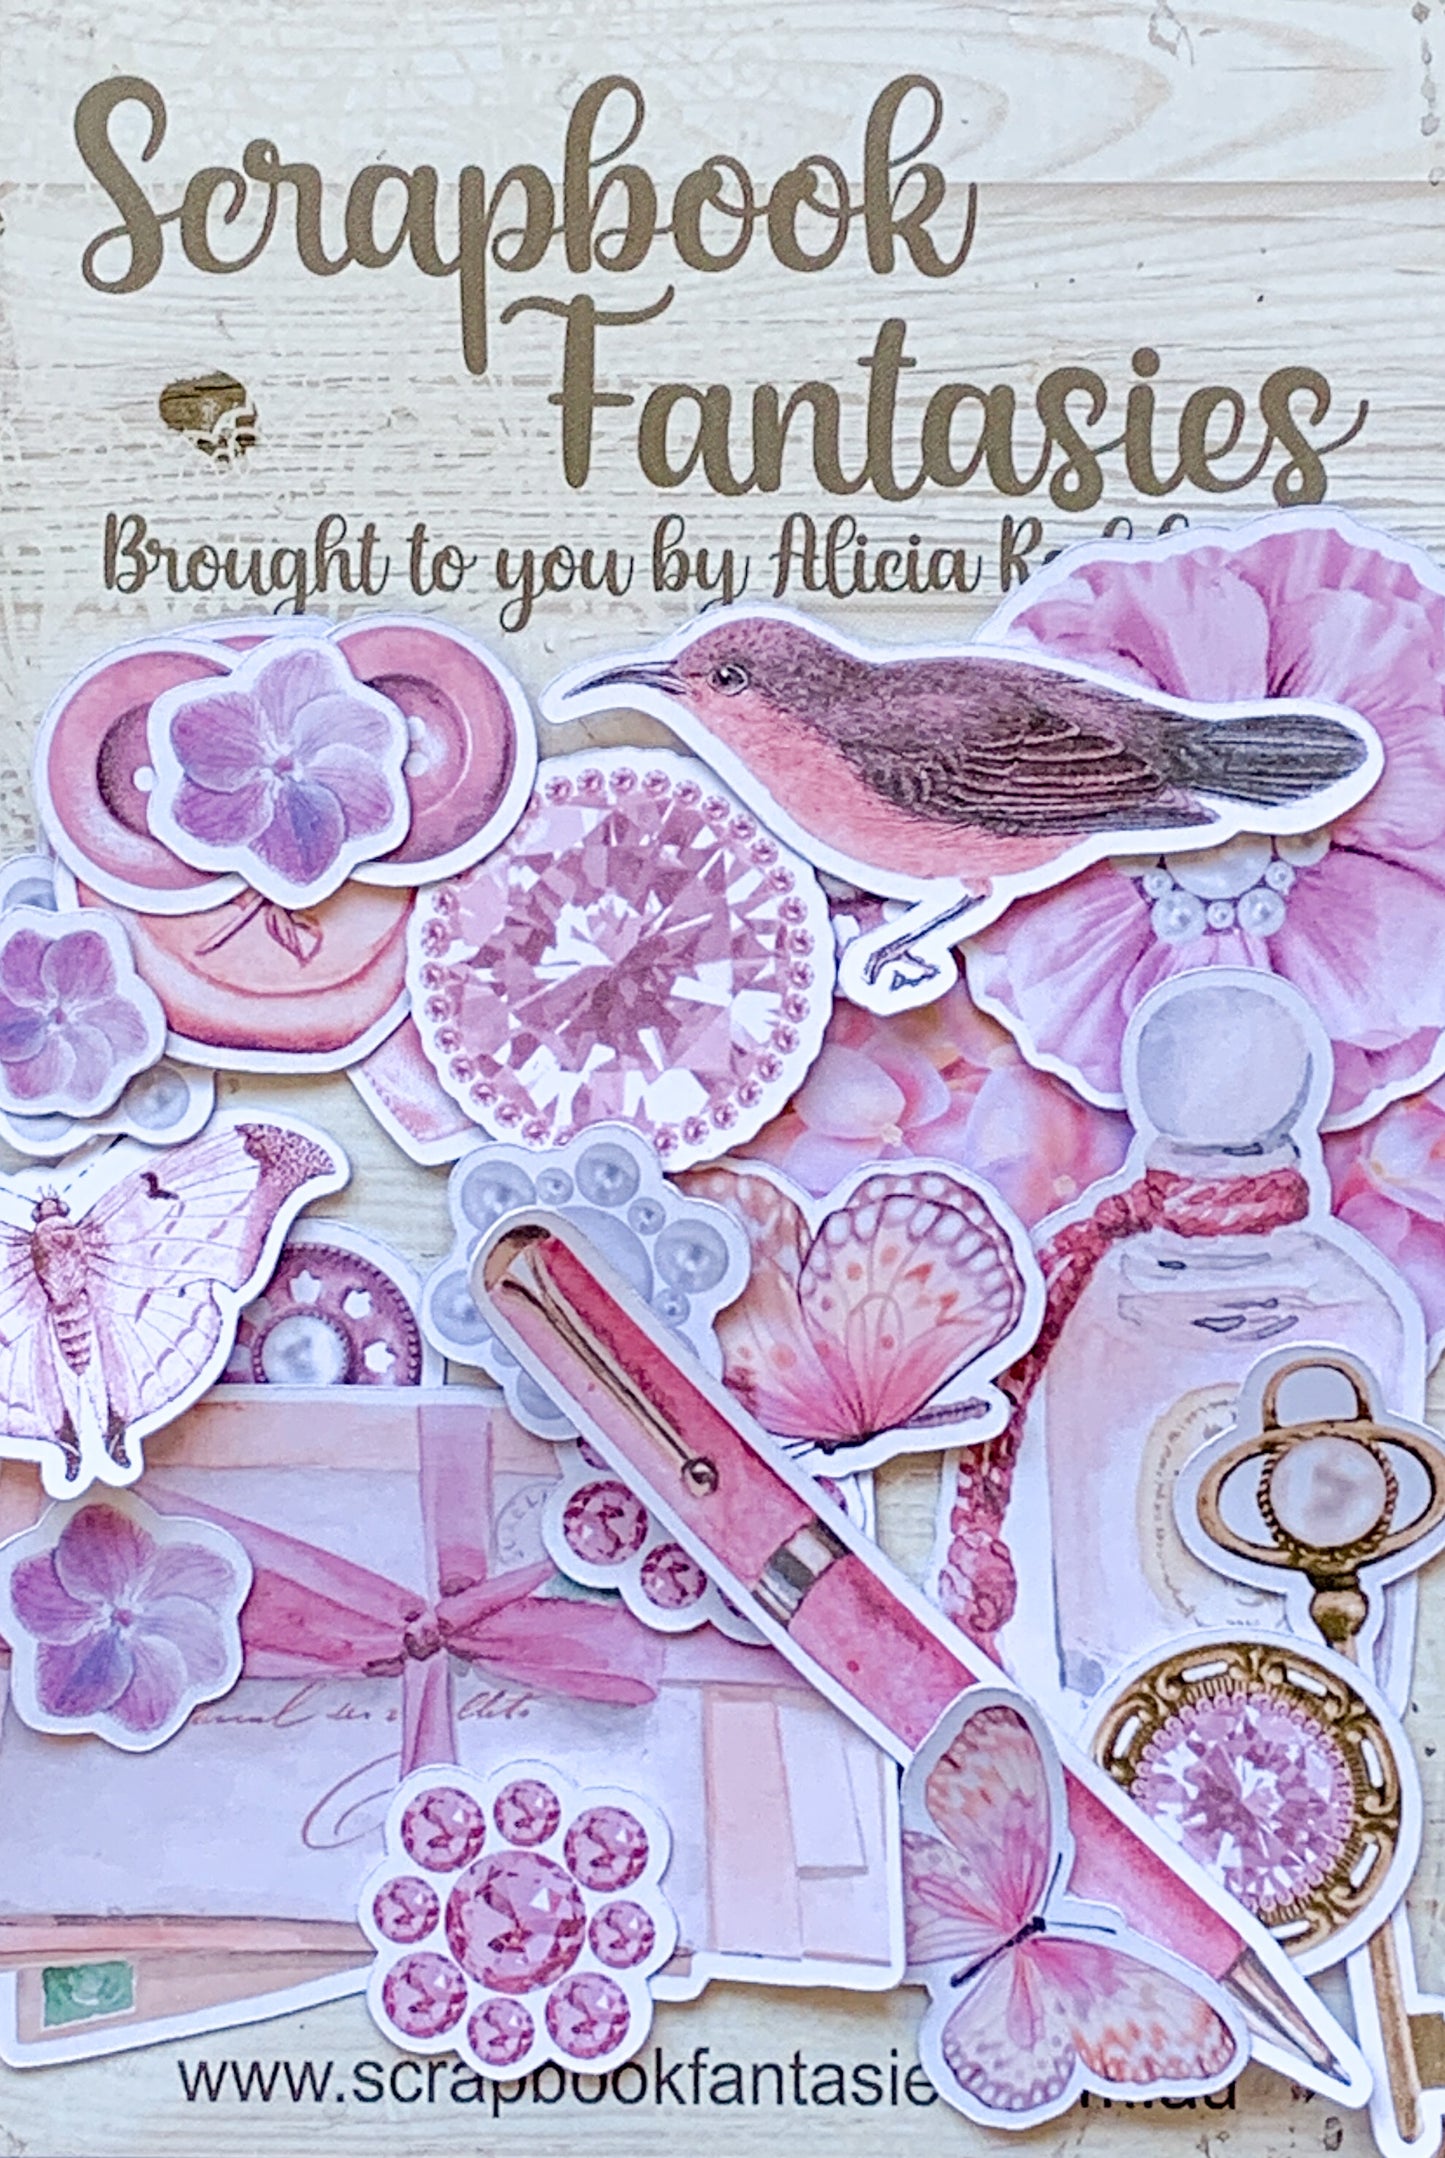 Springtime Tea Party Colour-Cuts Minis - Vintage Blush (25 pieces) Designed by Alicia Redshaw Exclusively for Scrapbook Fantasies